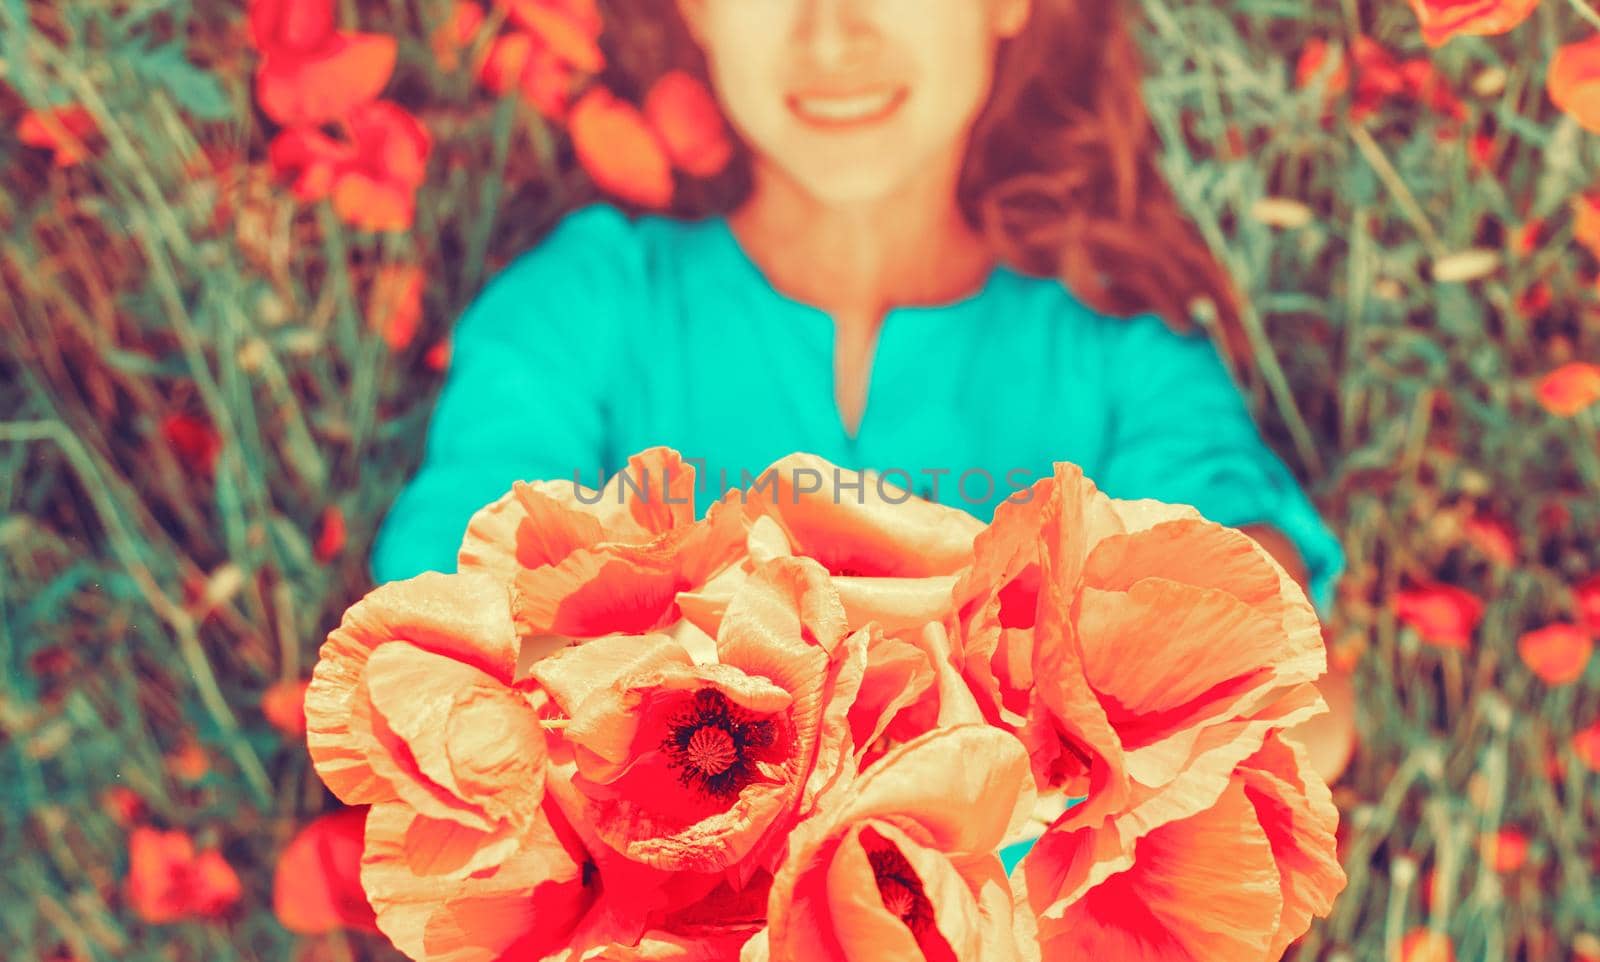 Smiling young woman lying with poppy bouquet on meadow, focus on flowers.